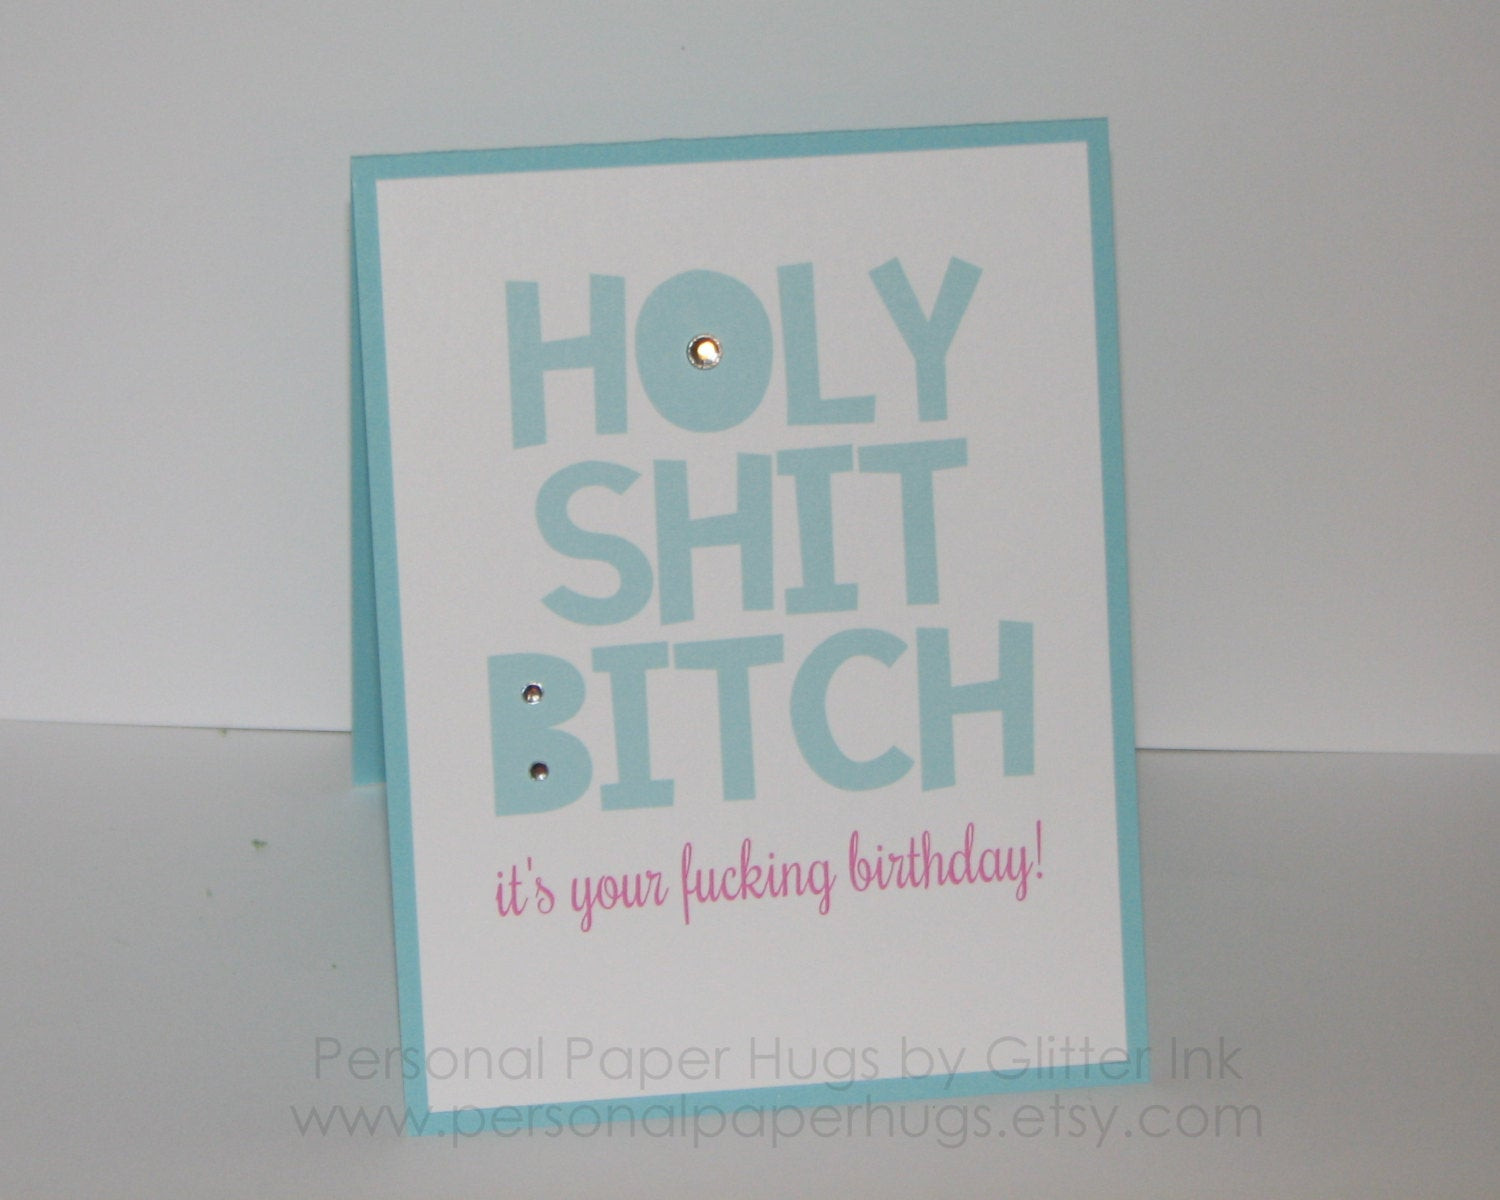 Funny Inappropriate Birthday Cards
 Funny Birthday Card Inappropriate Birthday by